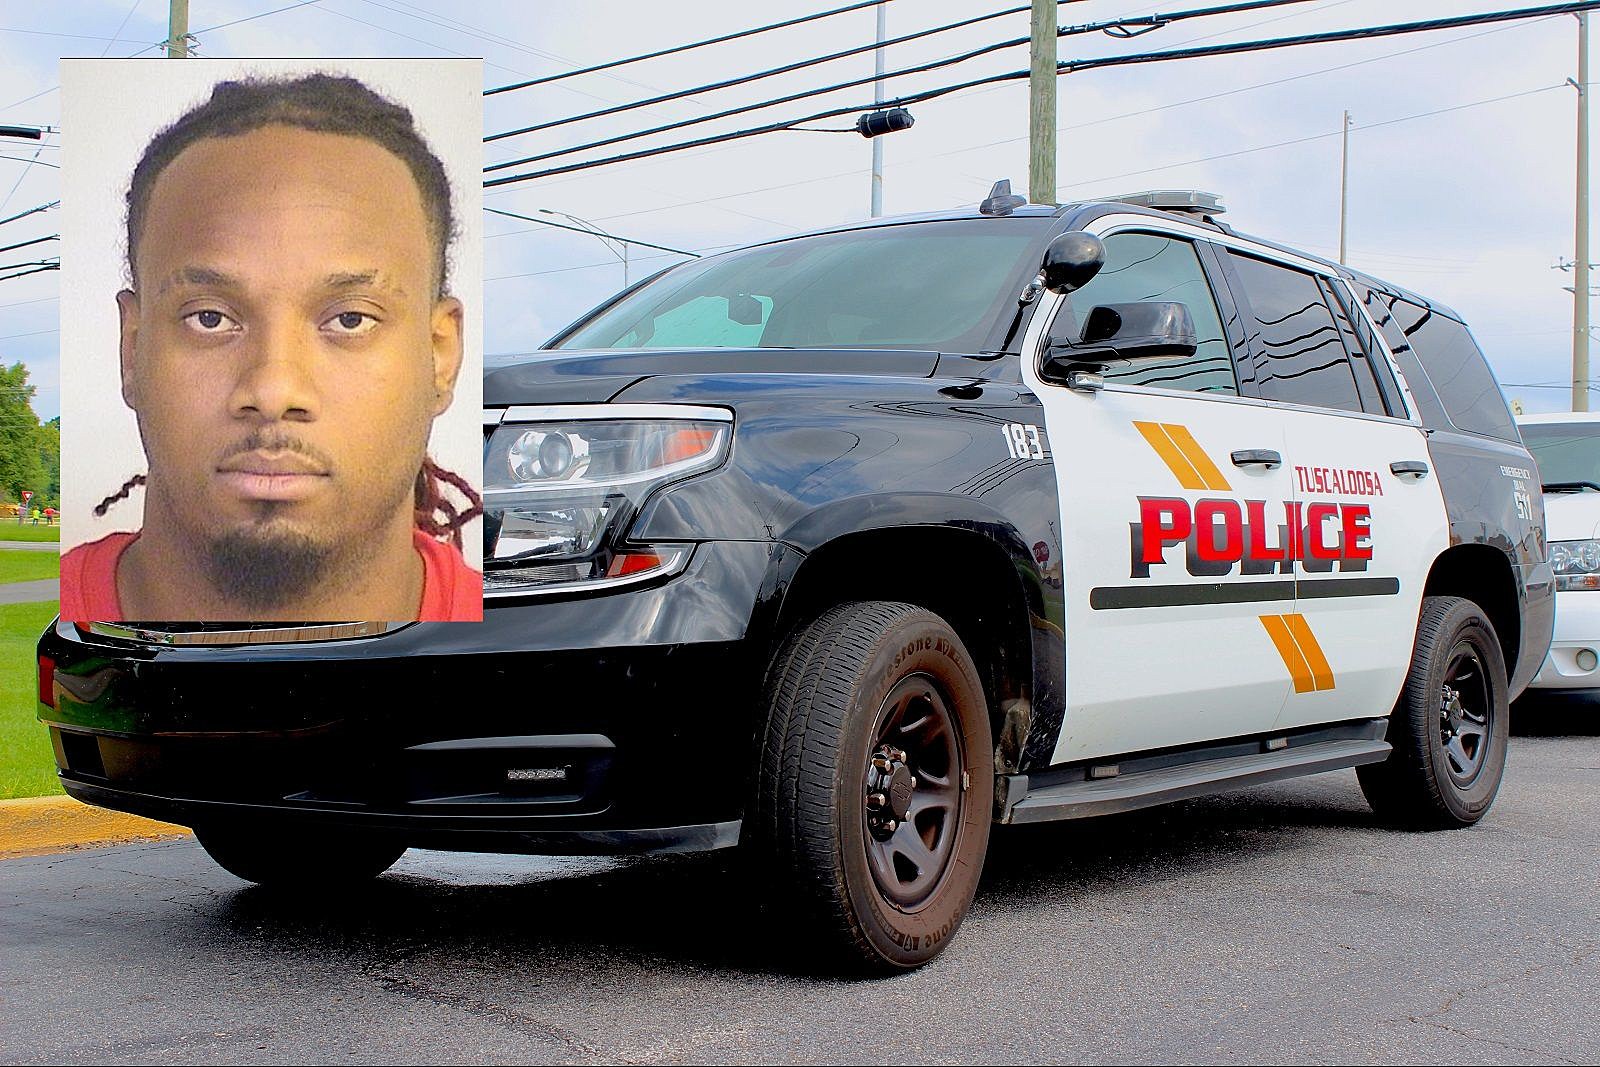 Bridge Street shooting suspect charged with first-degree assault